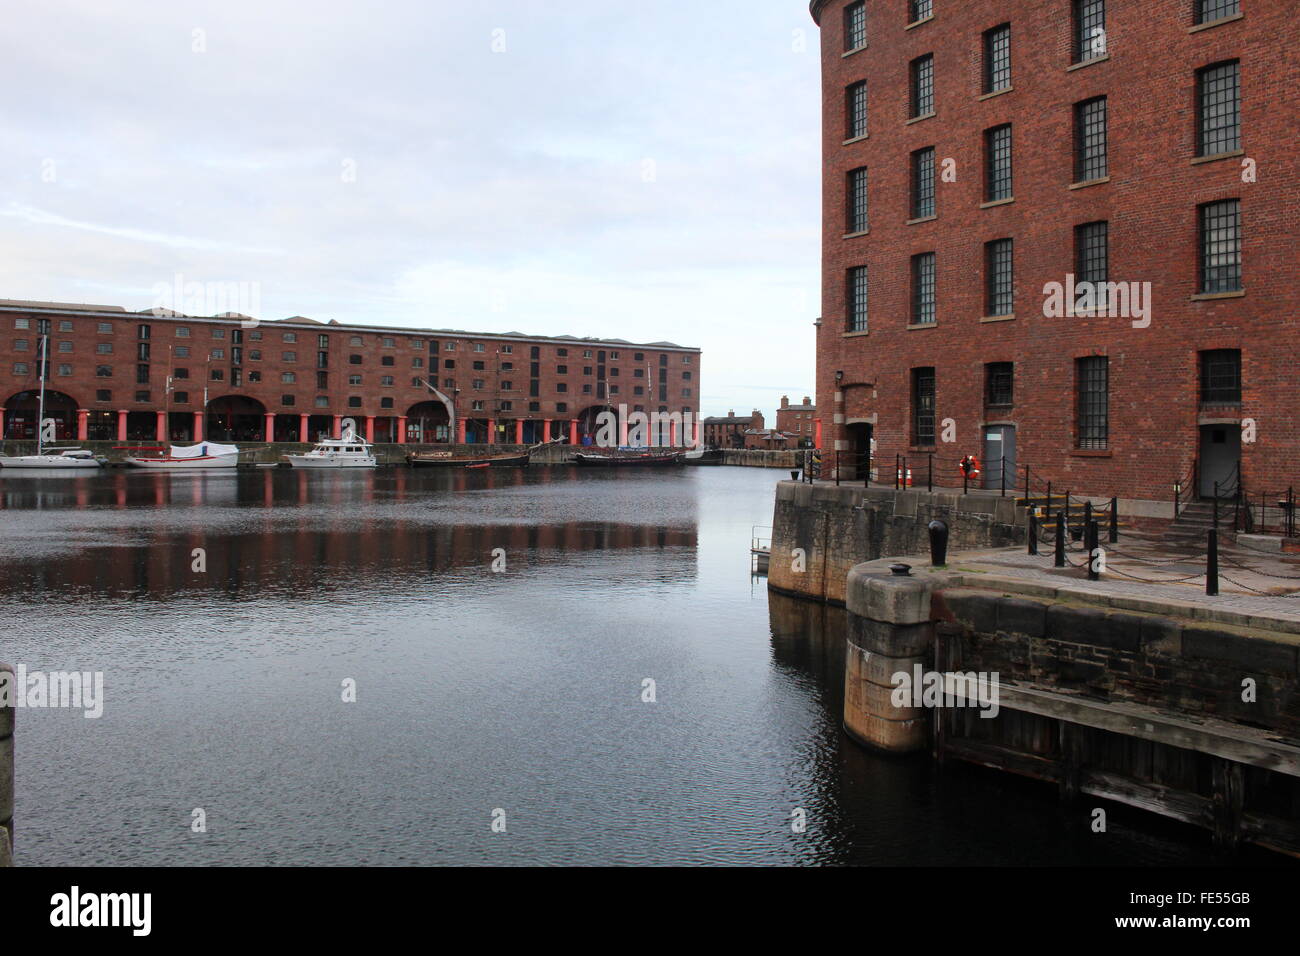 View of the Albert Docks in Liverpool Stock Photo